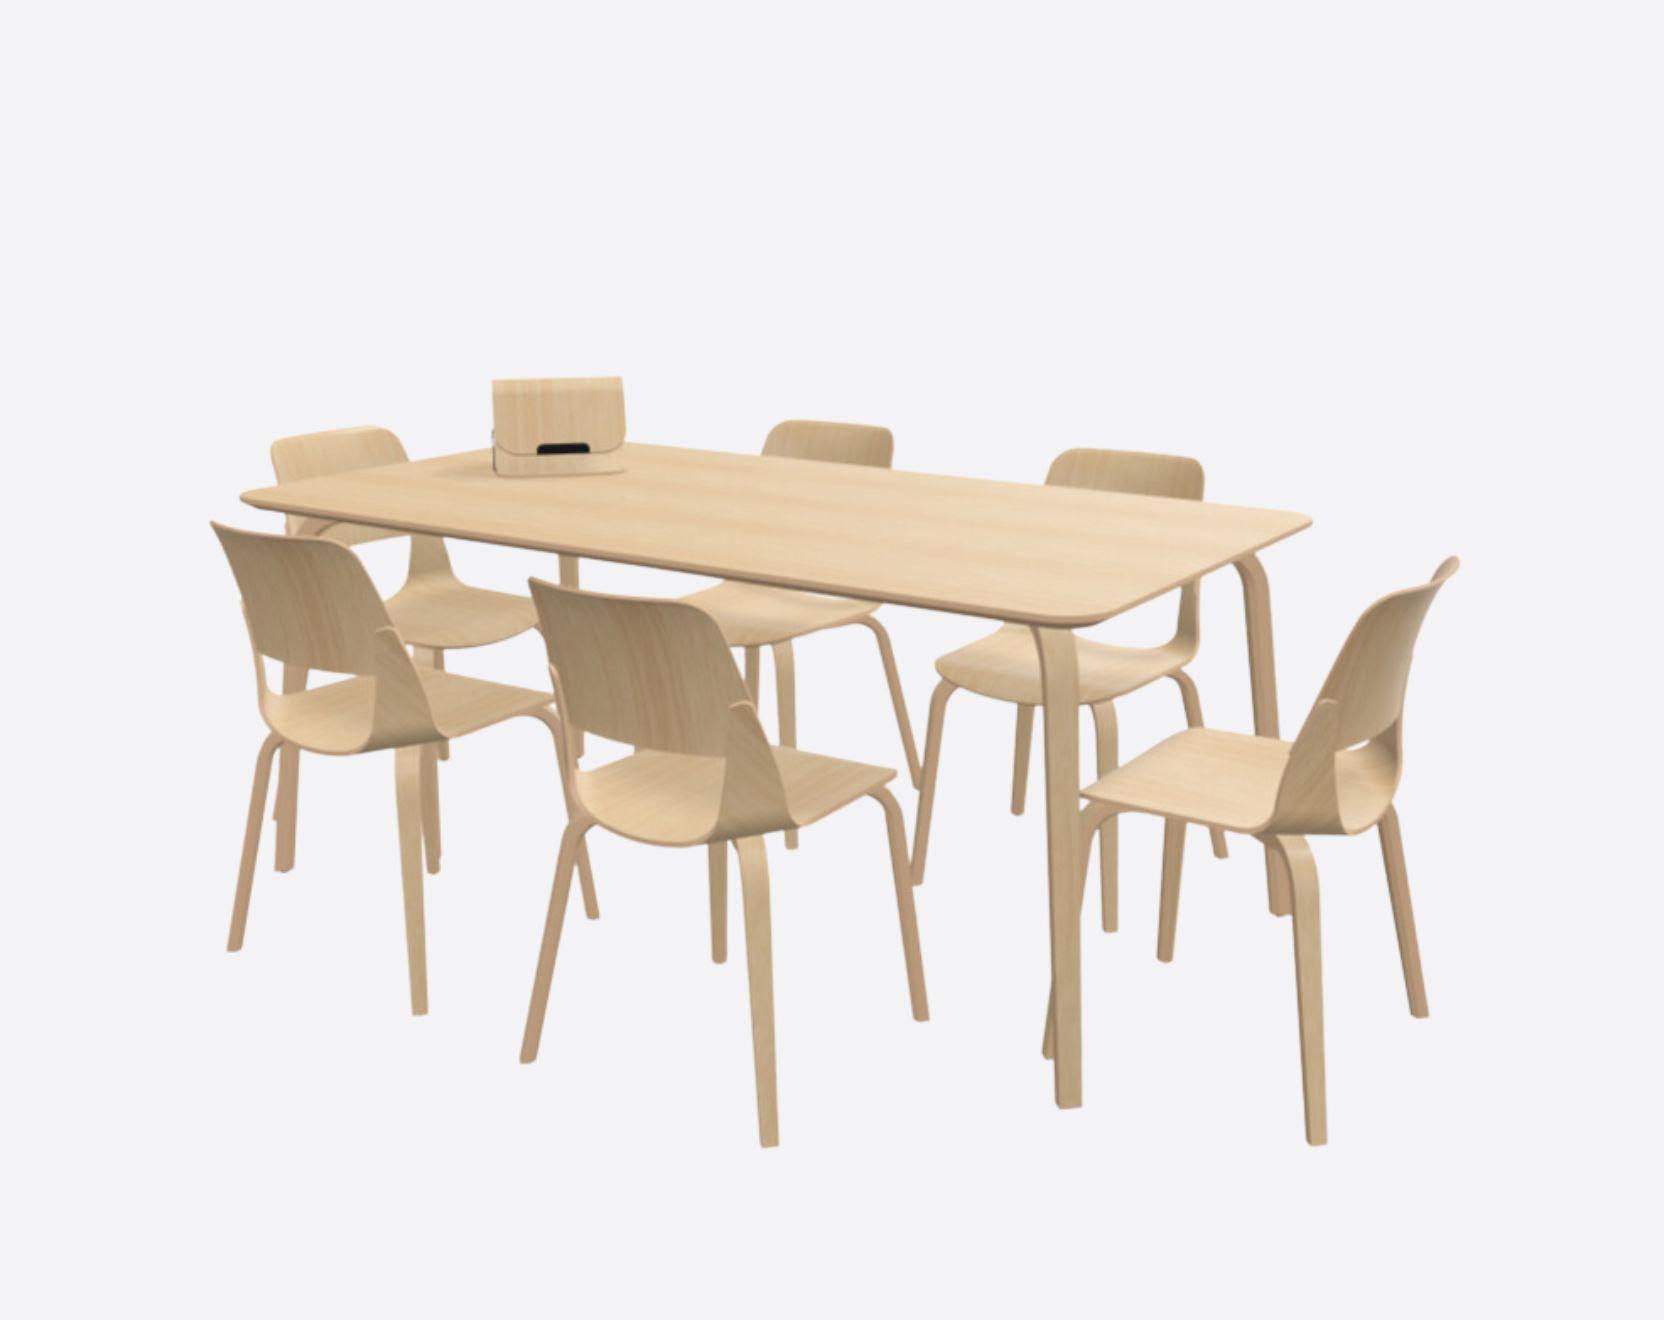 Dining set of oak table, 6 chairs and paper holder